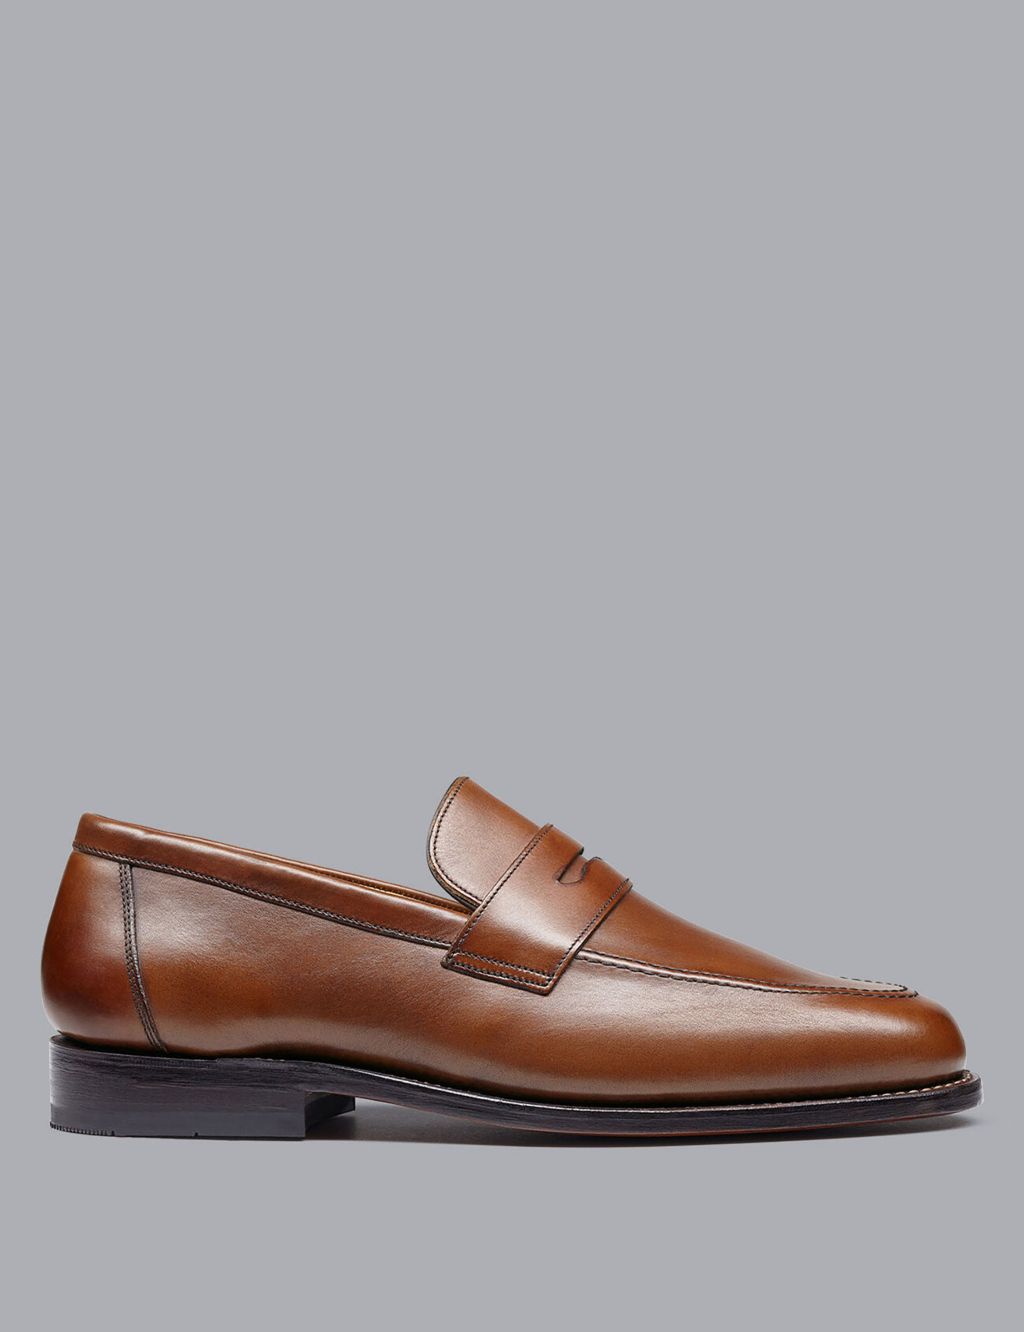 Leather Slip On Loafers image 1